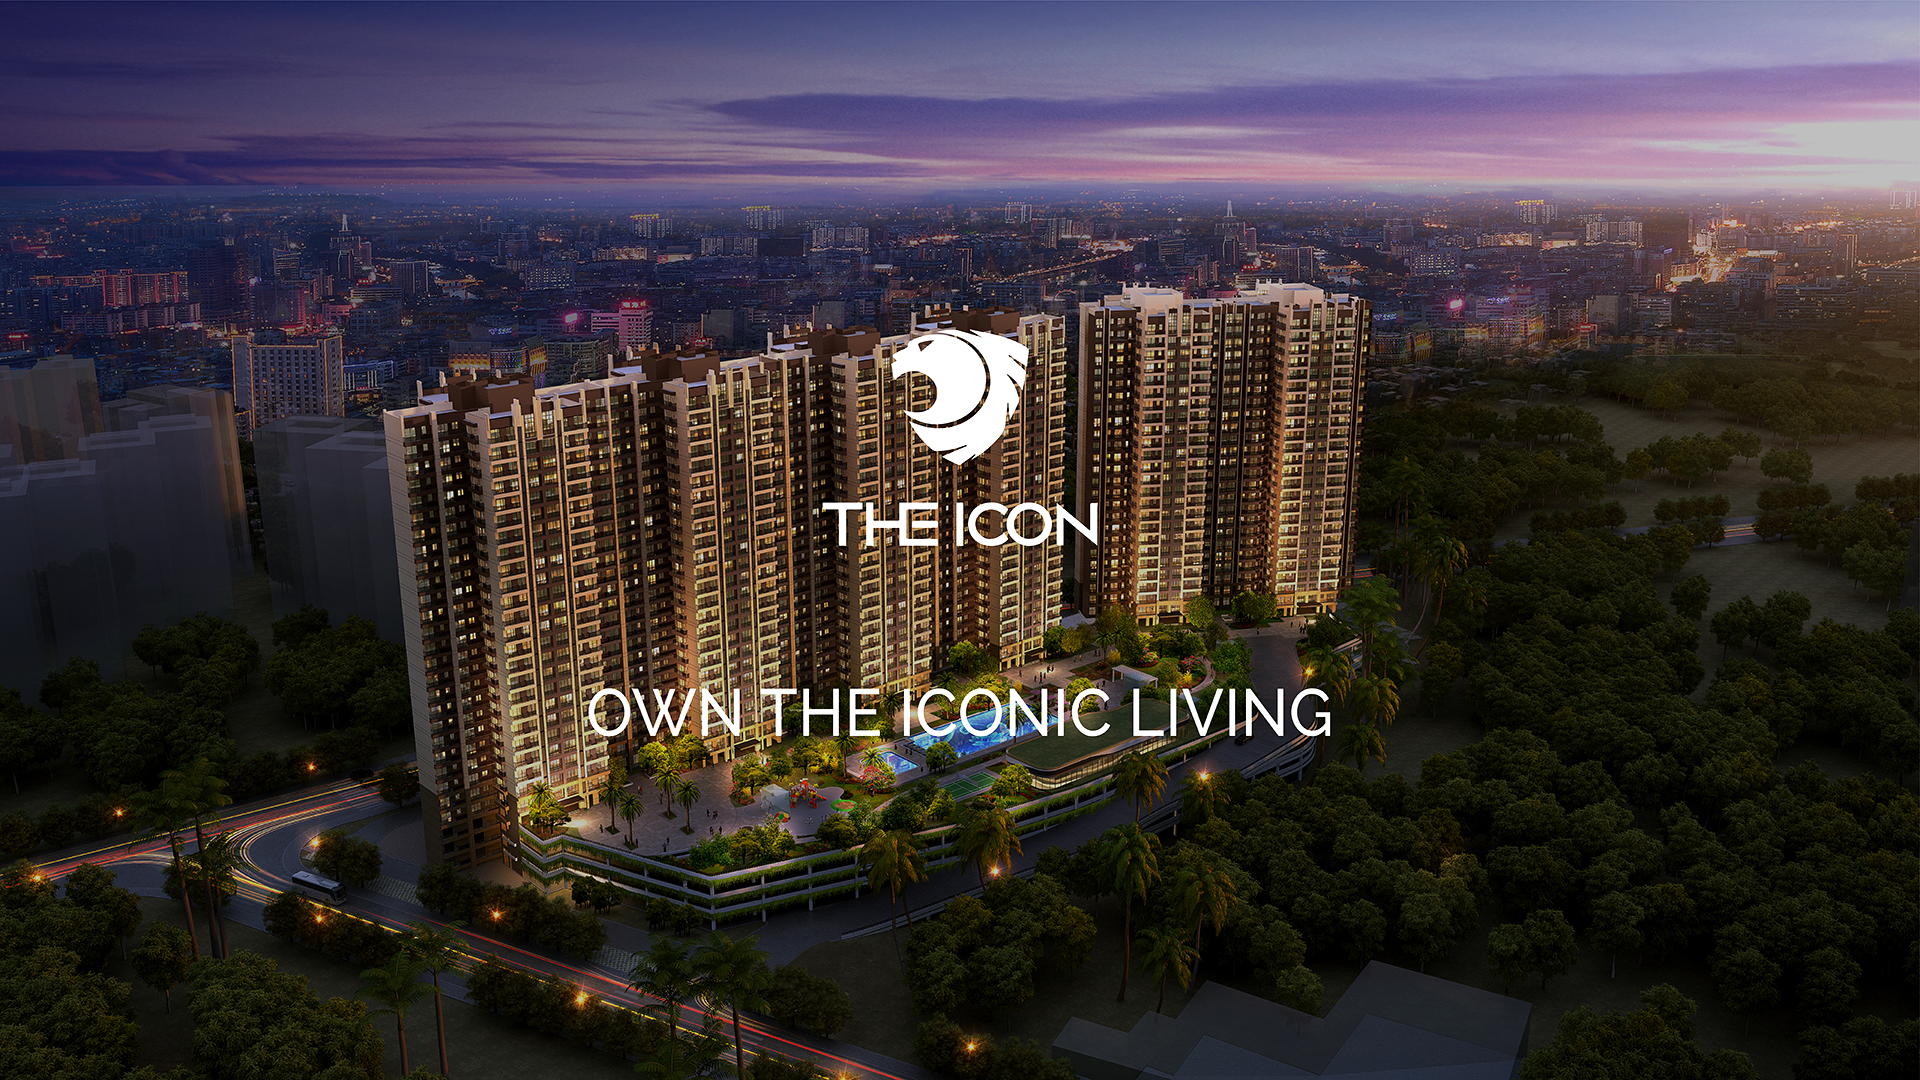 The Icon by Risland in Thane - Residential, 2 & 3 BHK Comfortable Flat in Dhokali, Thane (w)